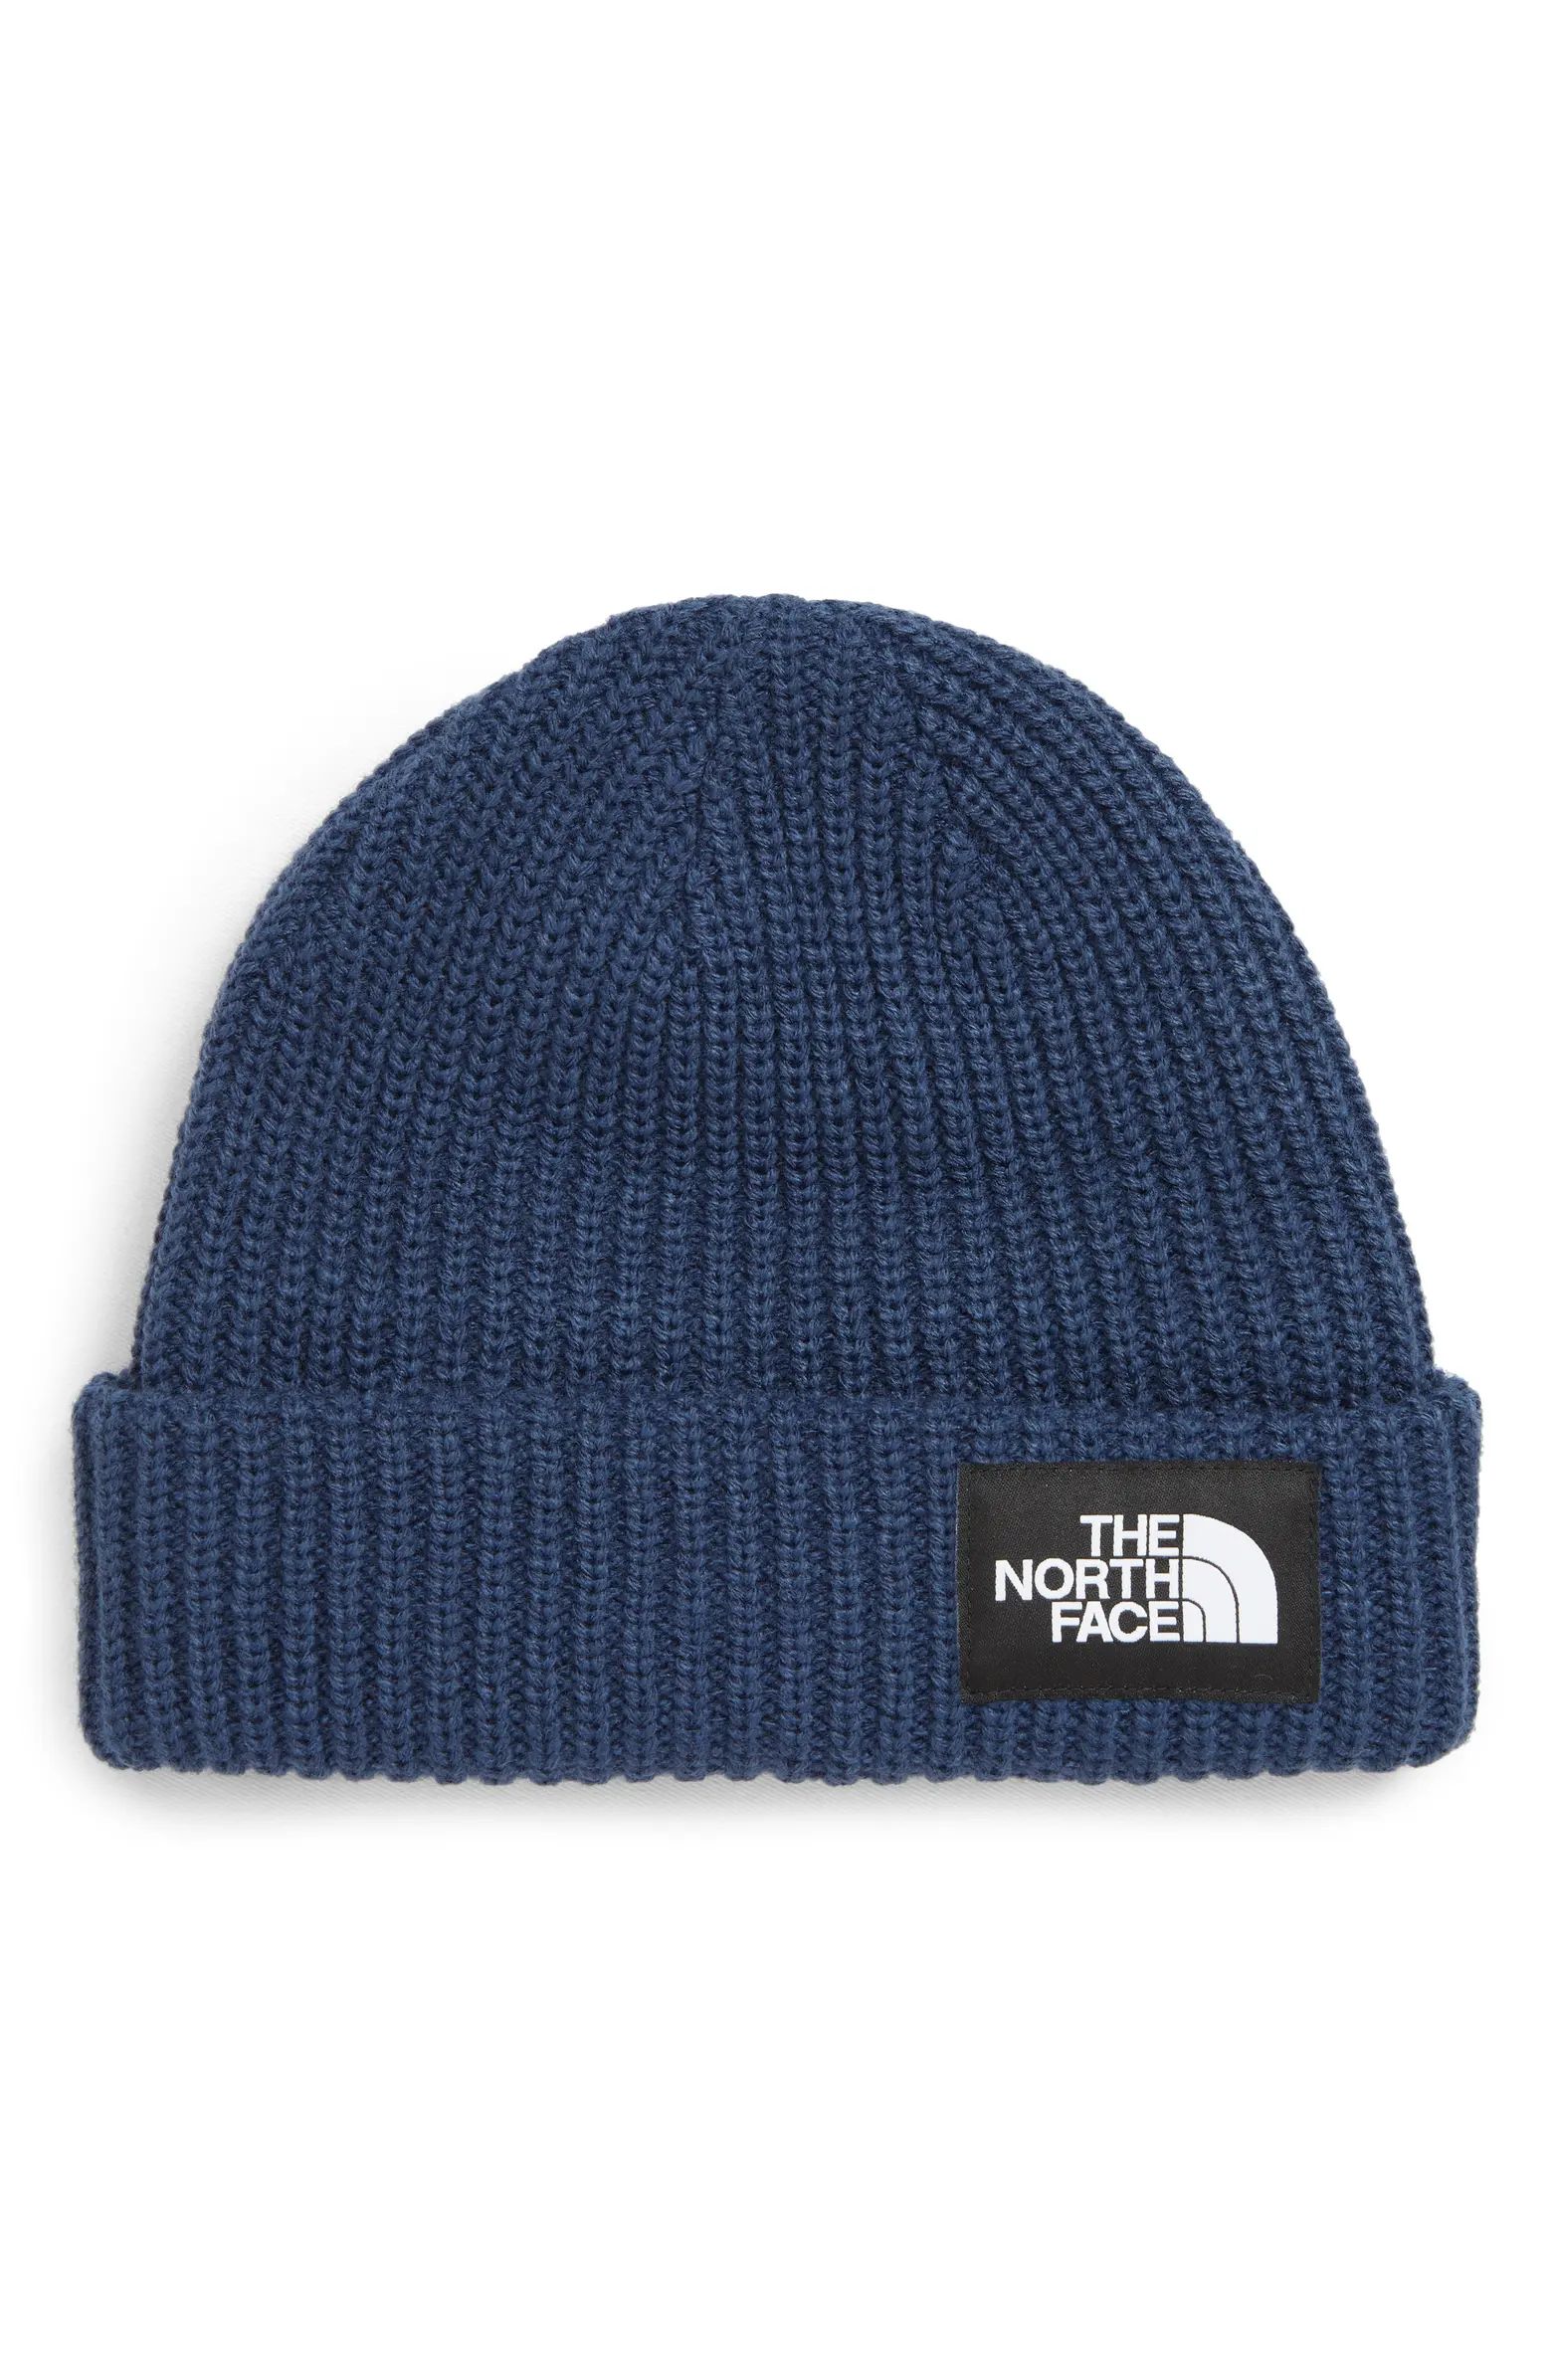 The North Face Kids' Salty Dog Beanie | Nordstrom | Nordstrom